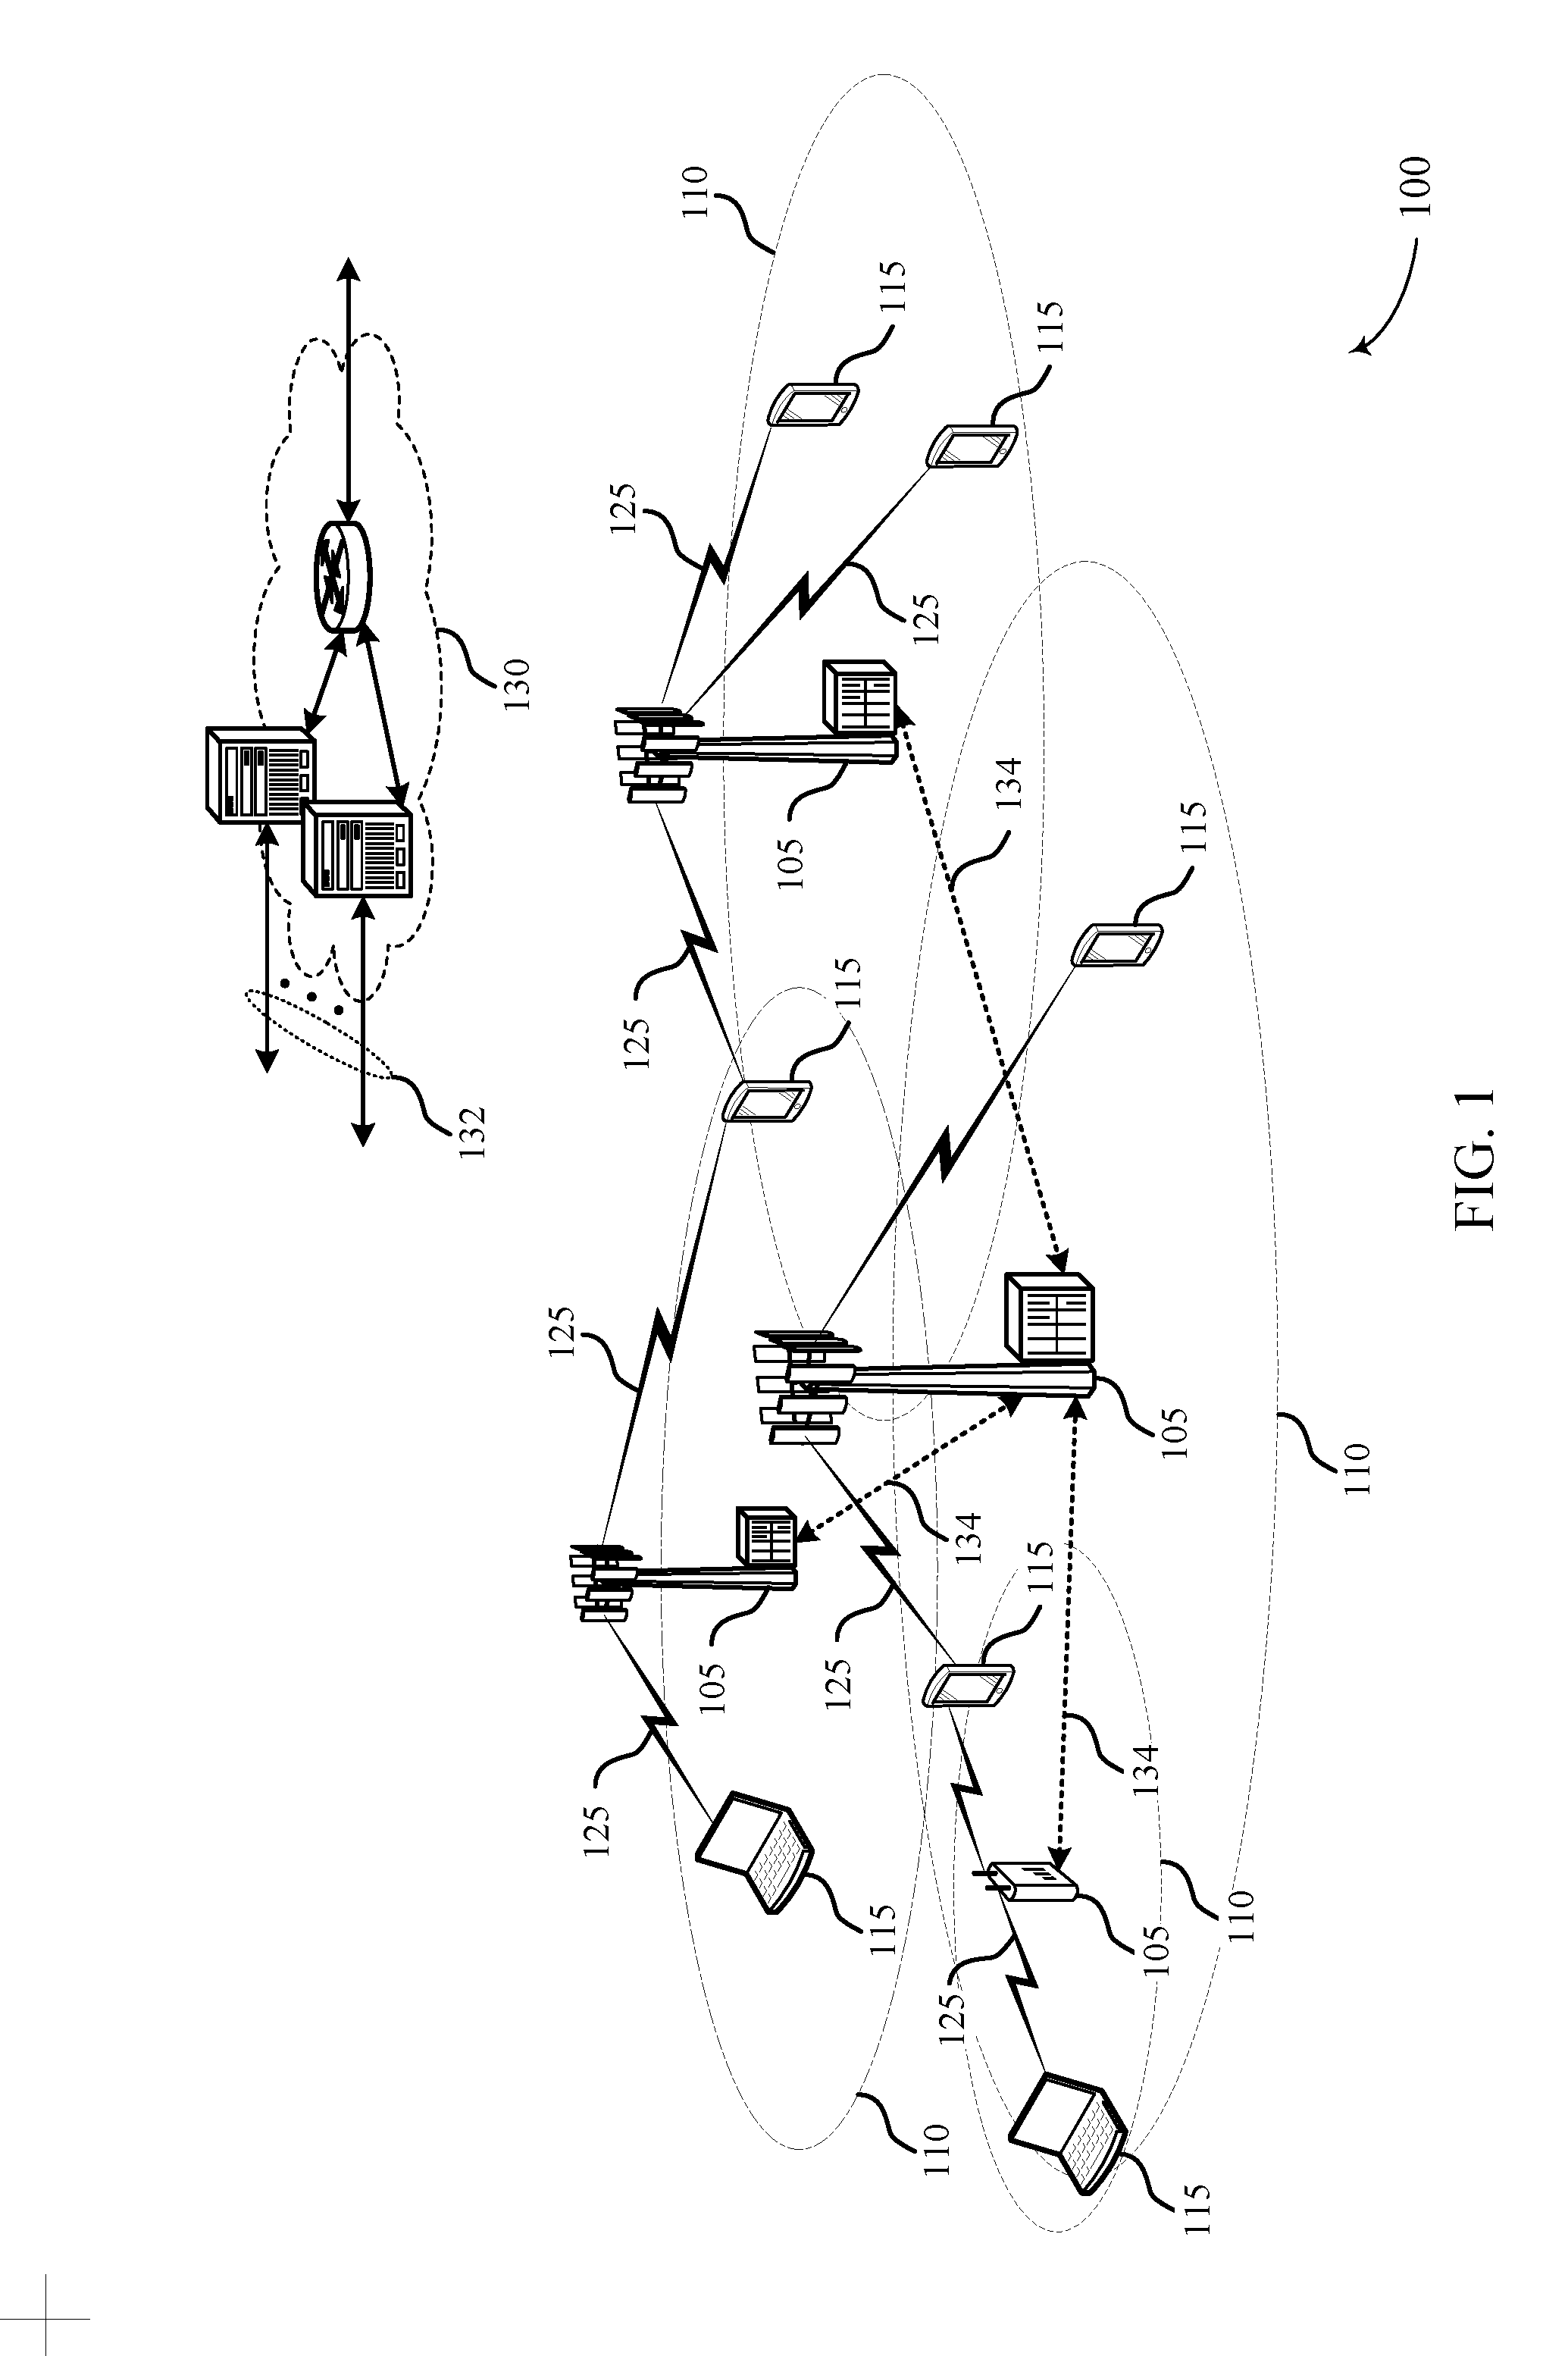 Channel state information for enhanced carrier aggregation